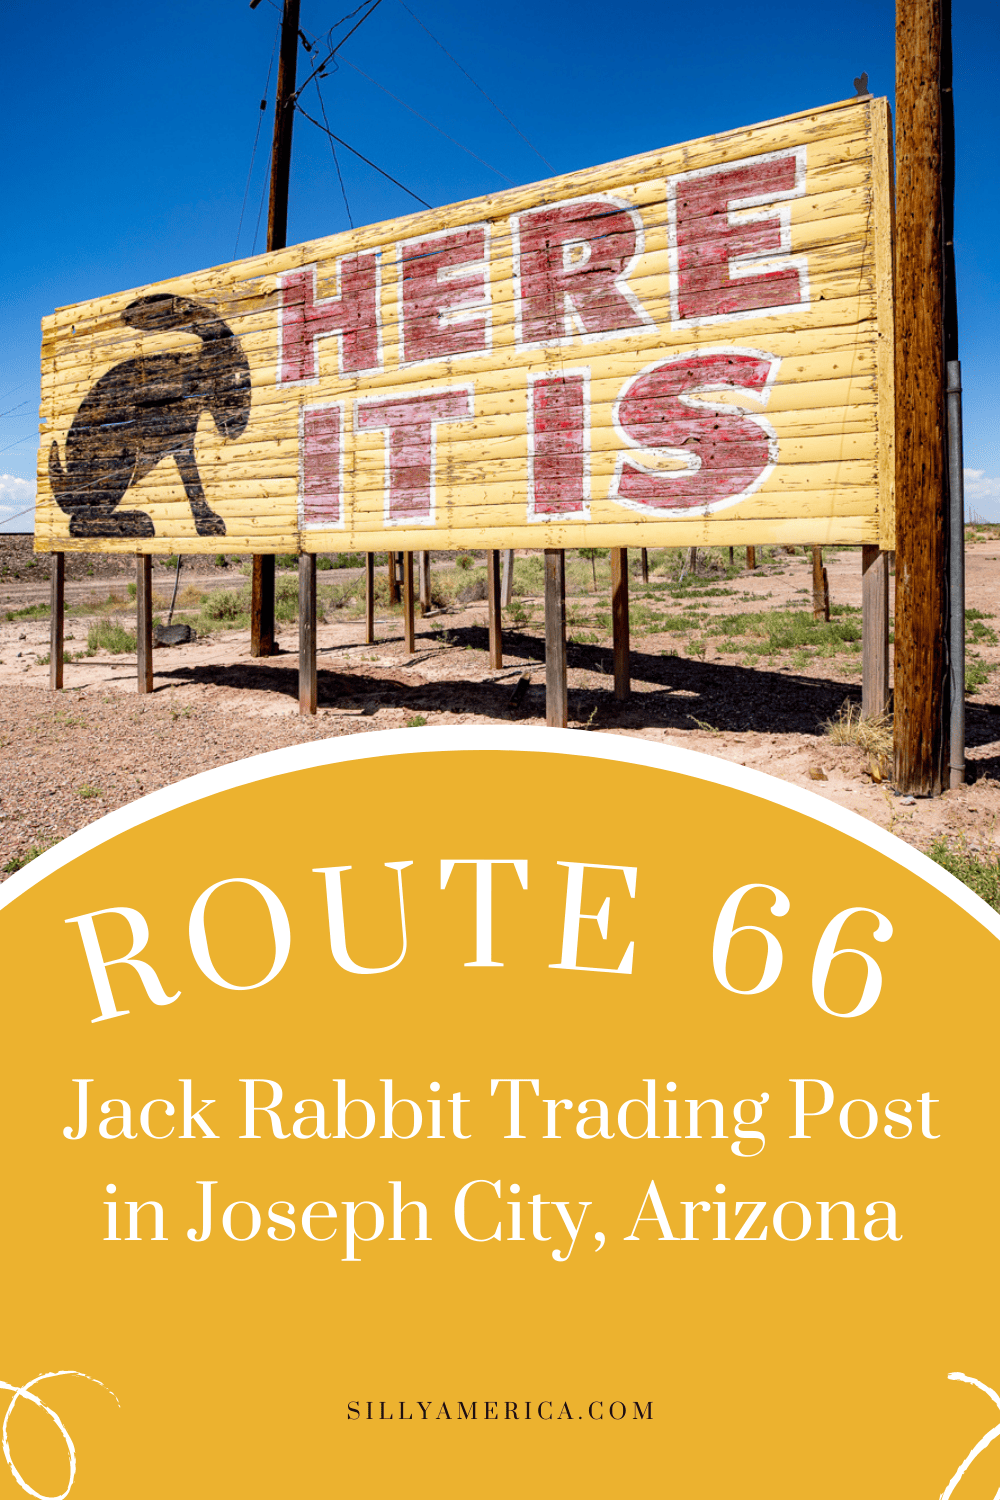 Here it is! Or should I say, hare it is! Jack Rabbit Trading Post in Joseph City, Arizona is a Route 66 institution that has been attracting travelers through clever marketing since the 1940s. Visit this souvenir shop and roadside attraction on your Route 66 road trip through Arizona. Add it to your travel itinerary and bucket list! #RoadsideAttraction #RoadsideAttractions #Route66RoadsideAttraction #ArizonaRoadsideAttraction #RoadTrip #ArizonaRoadTrip #ArizonaRoute66 #Route66